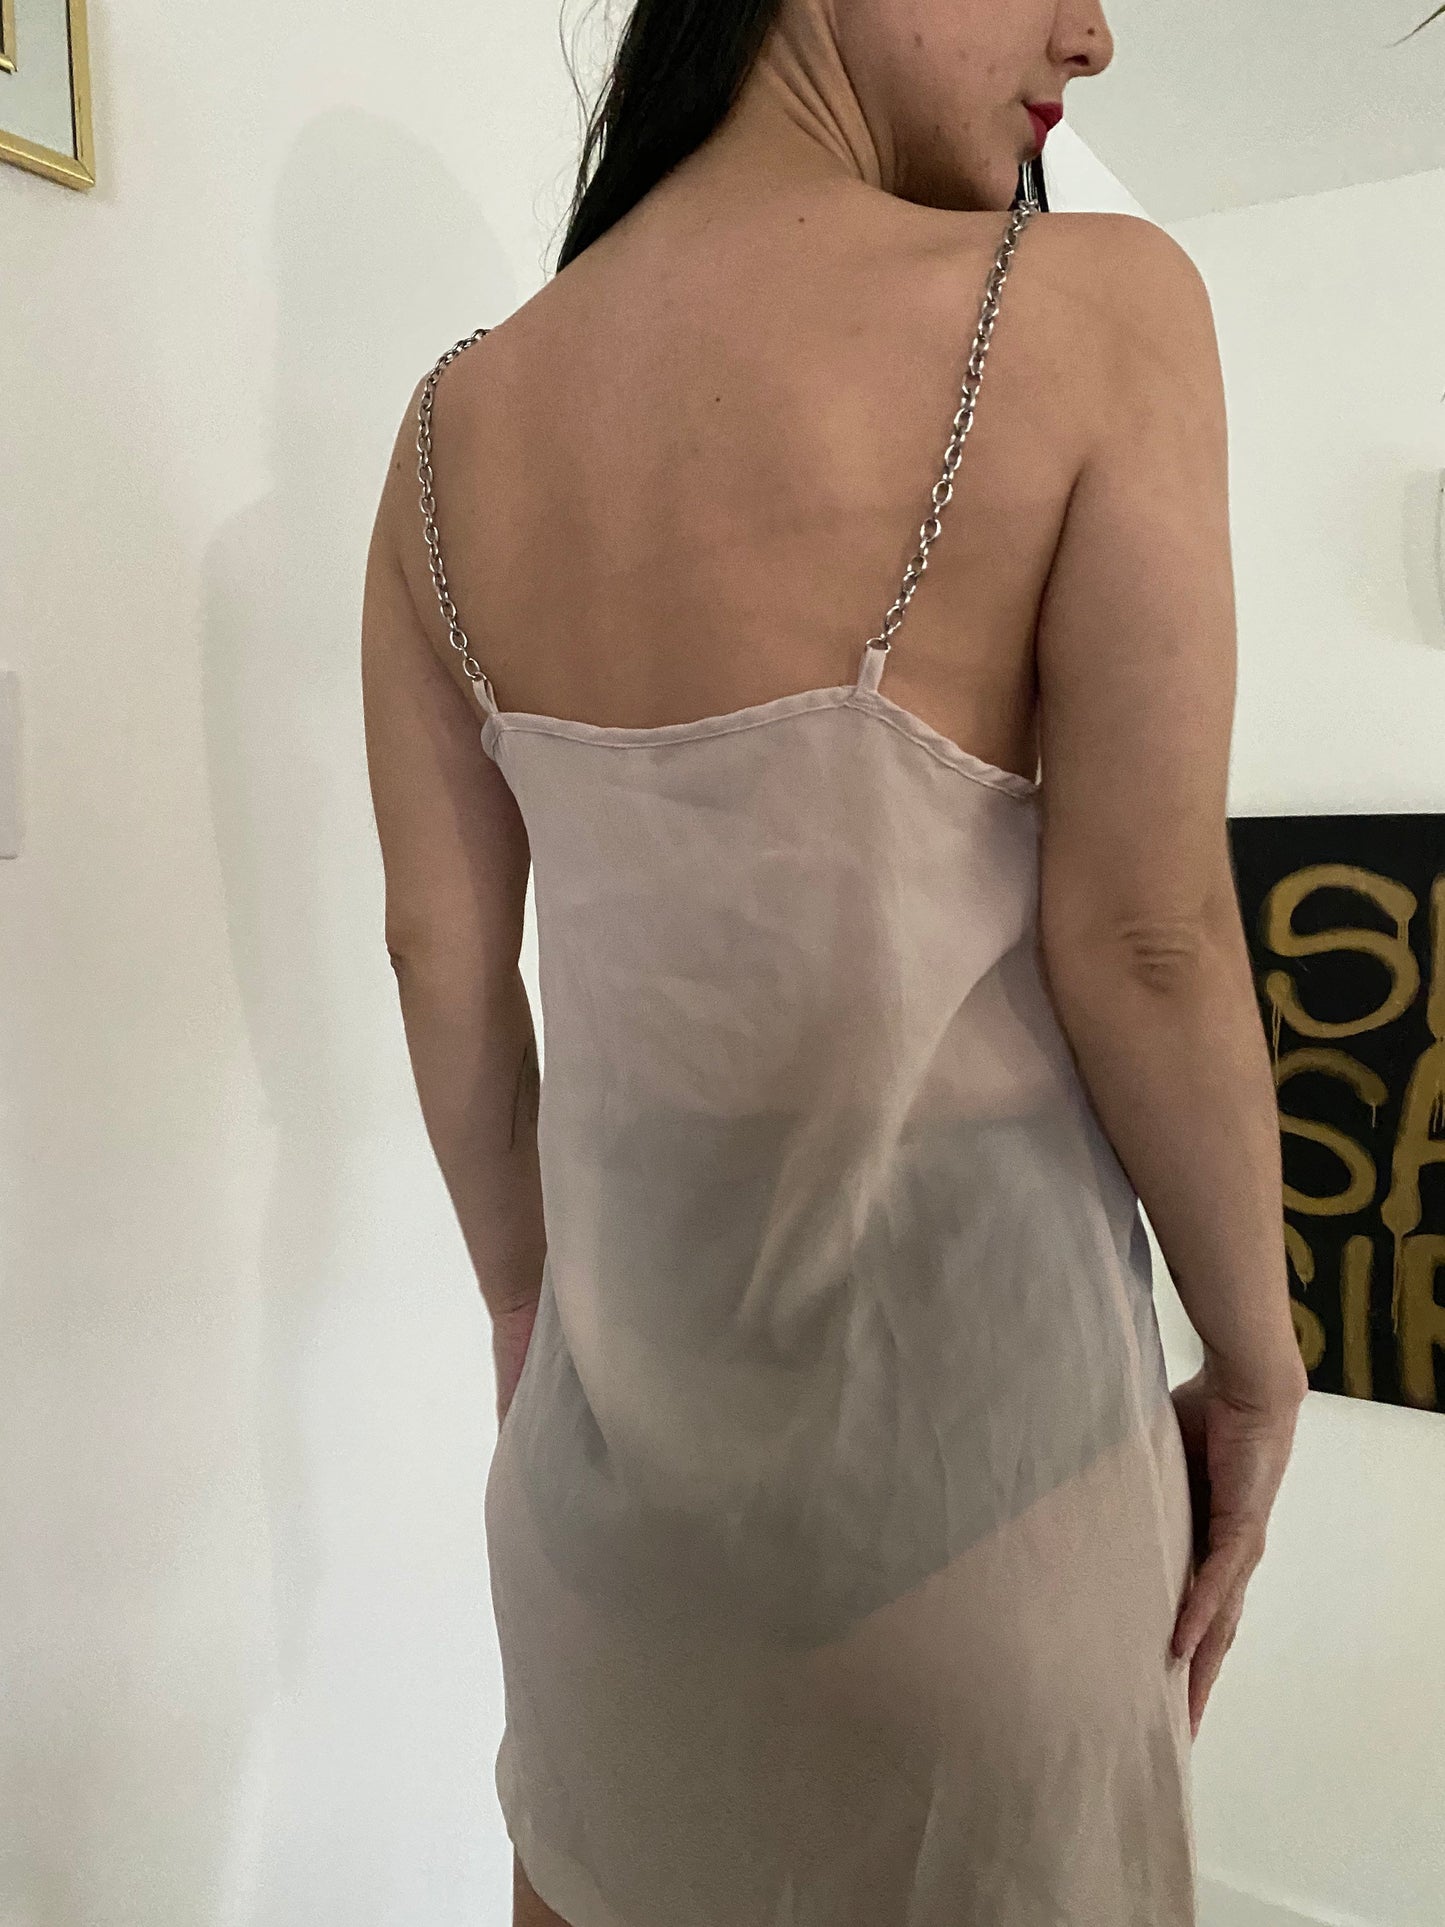 sheer slip with chain straps